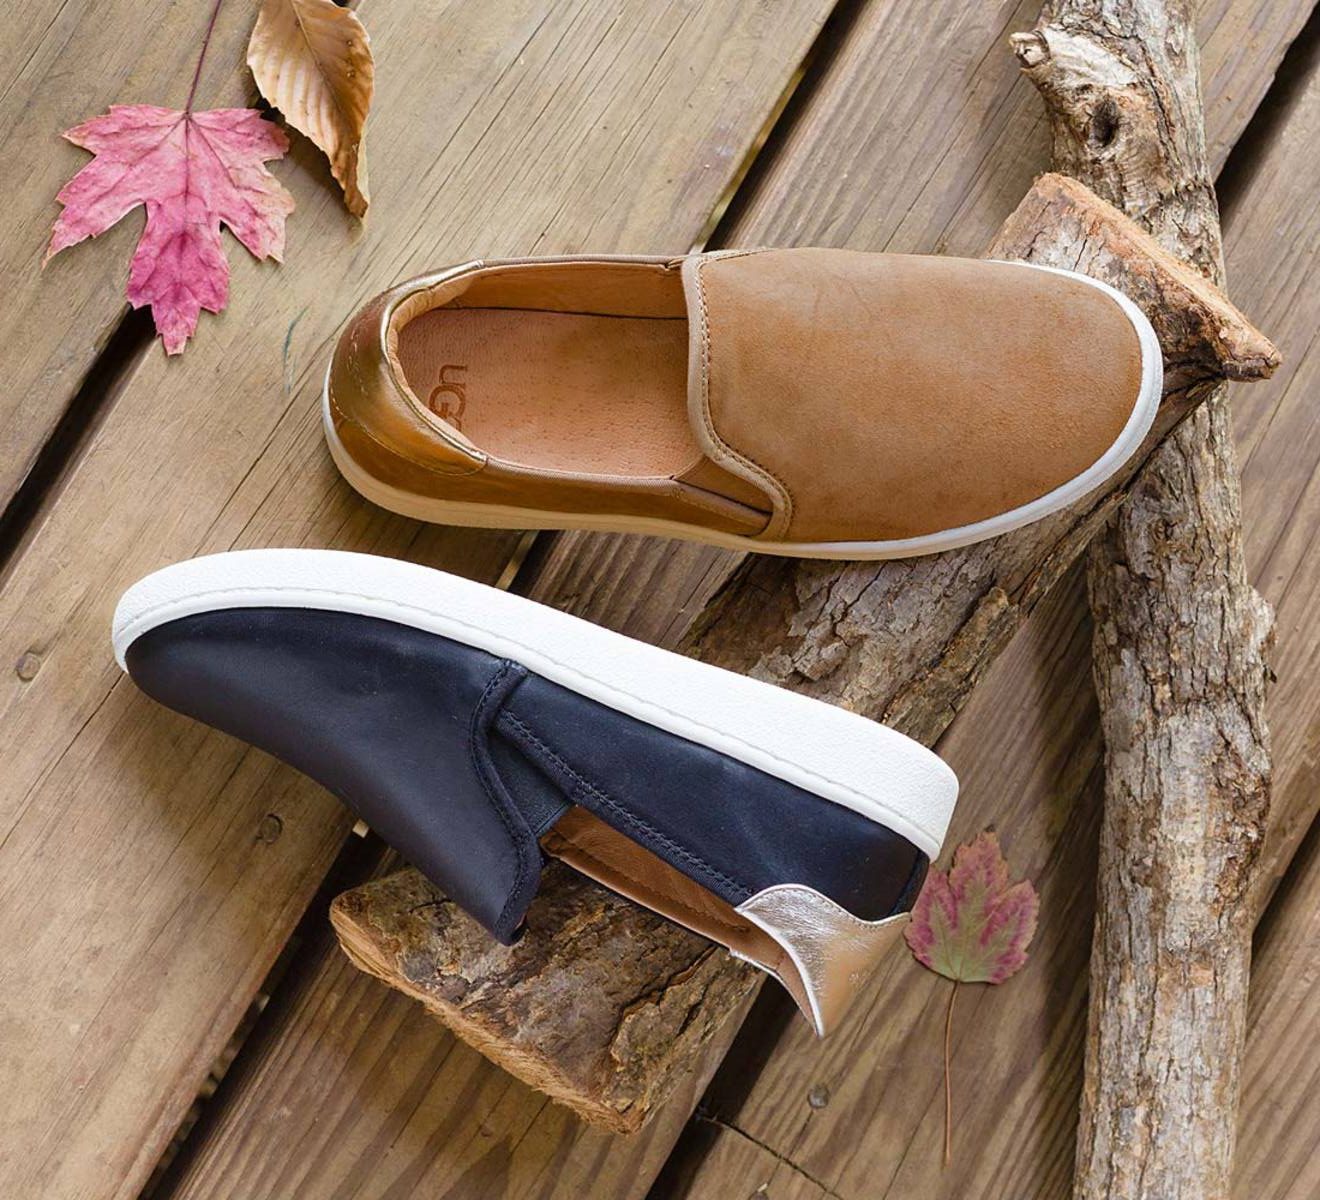 uggs leather sneakers